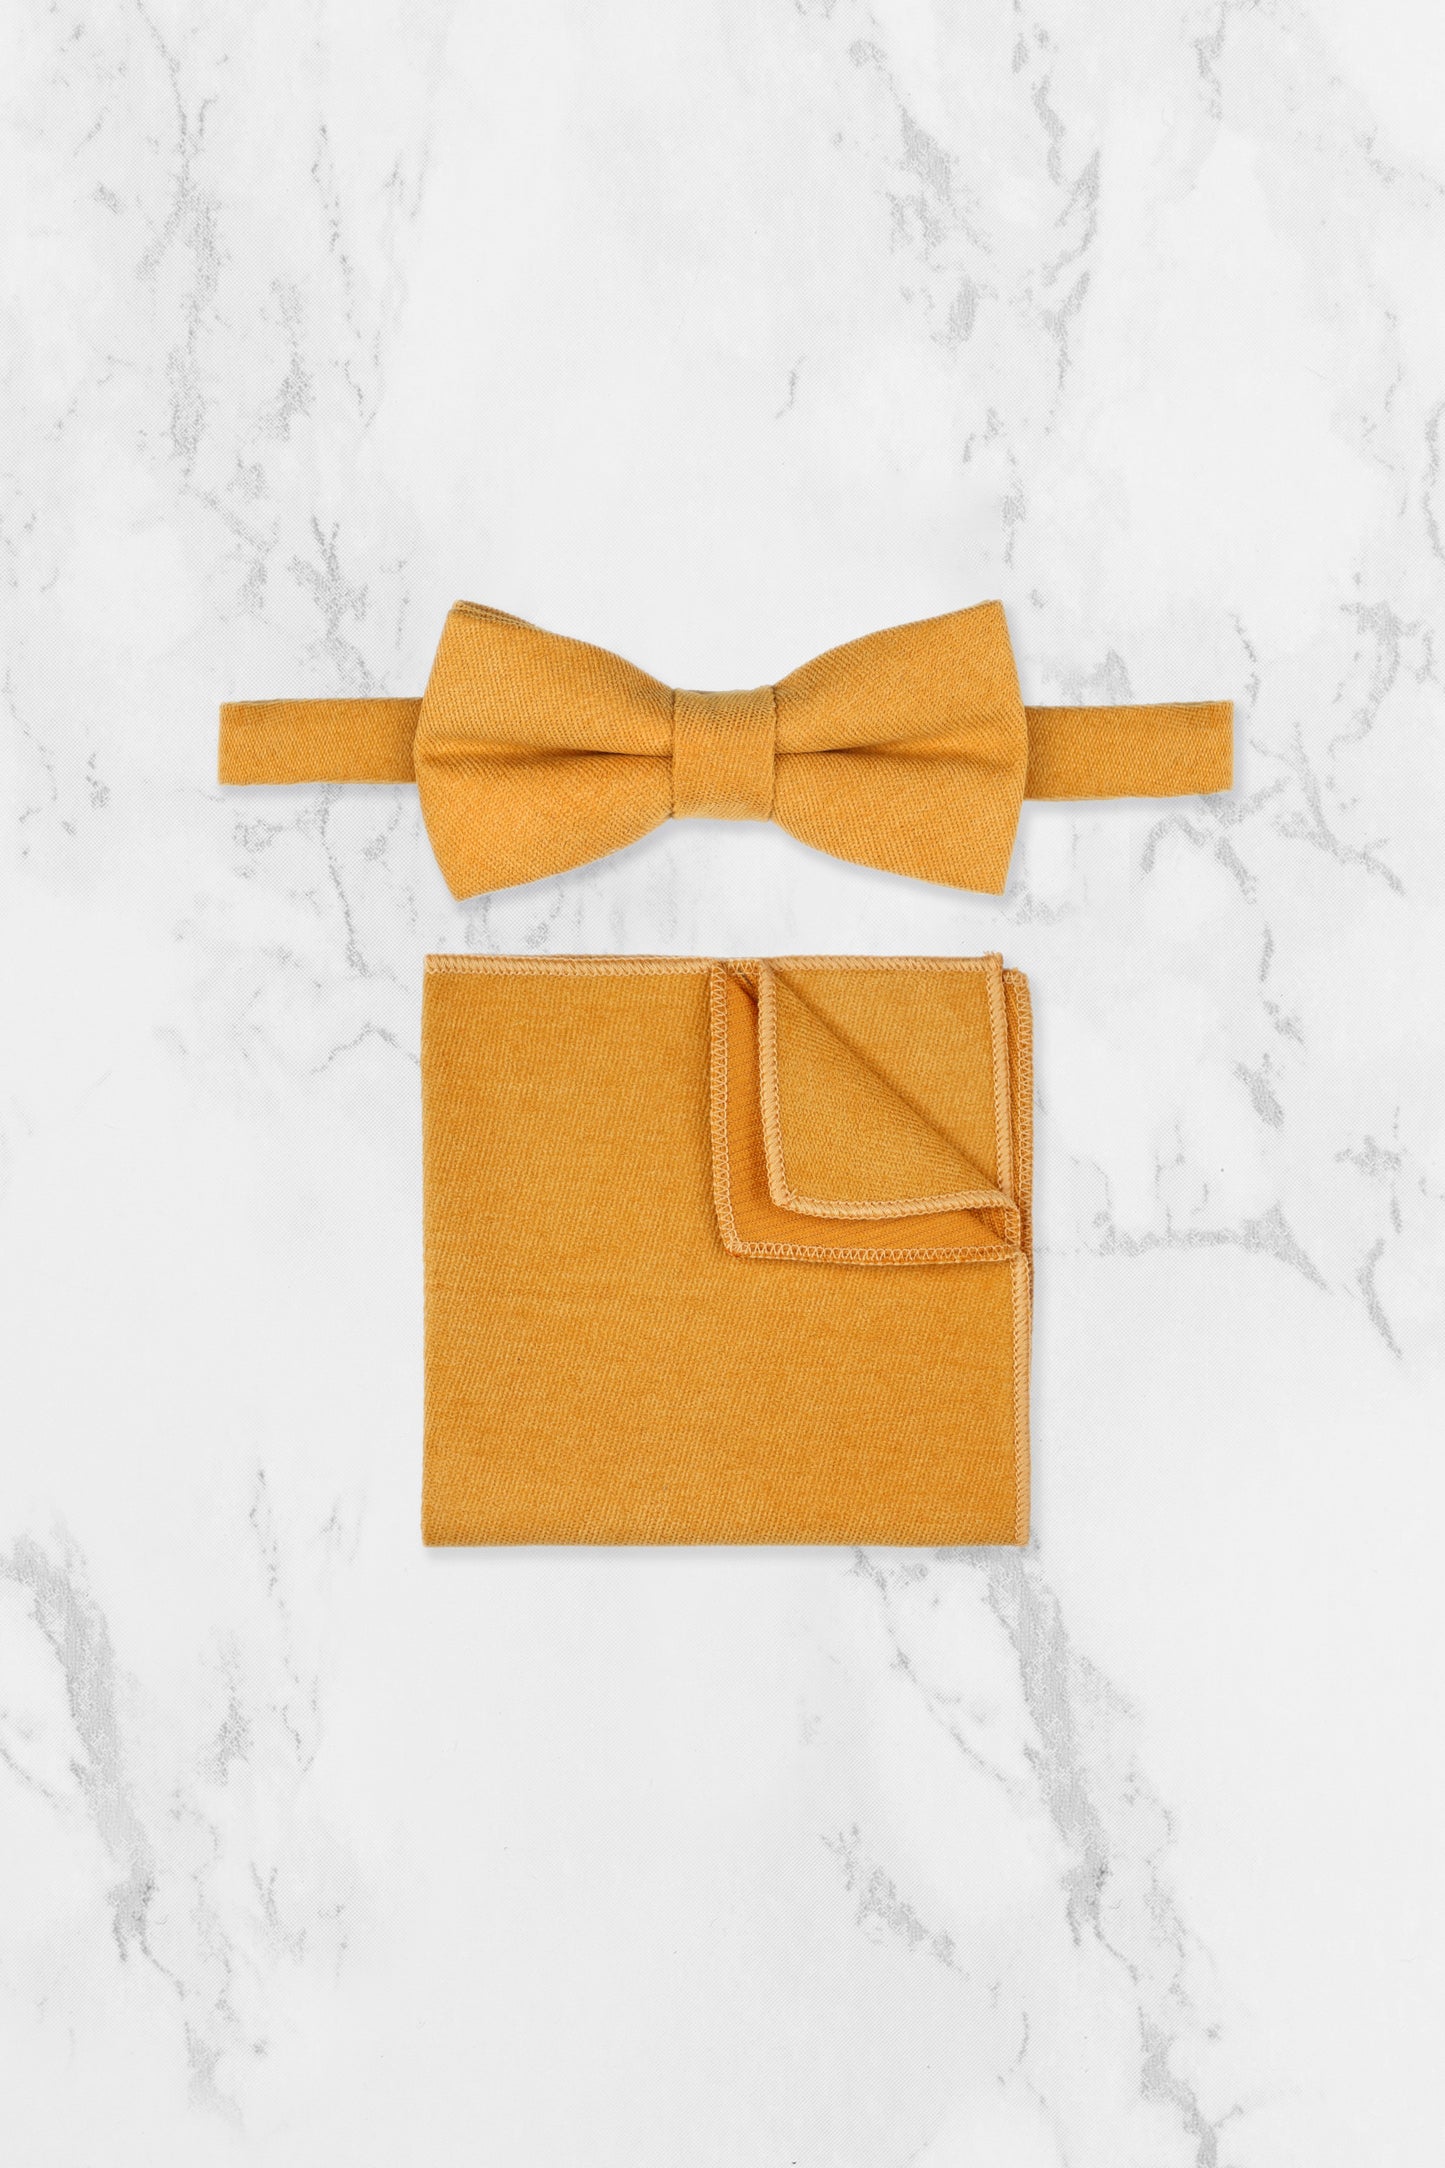 100% Brushed Cotton Suede Pocket Square - Mustard Yellow